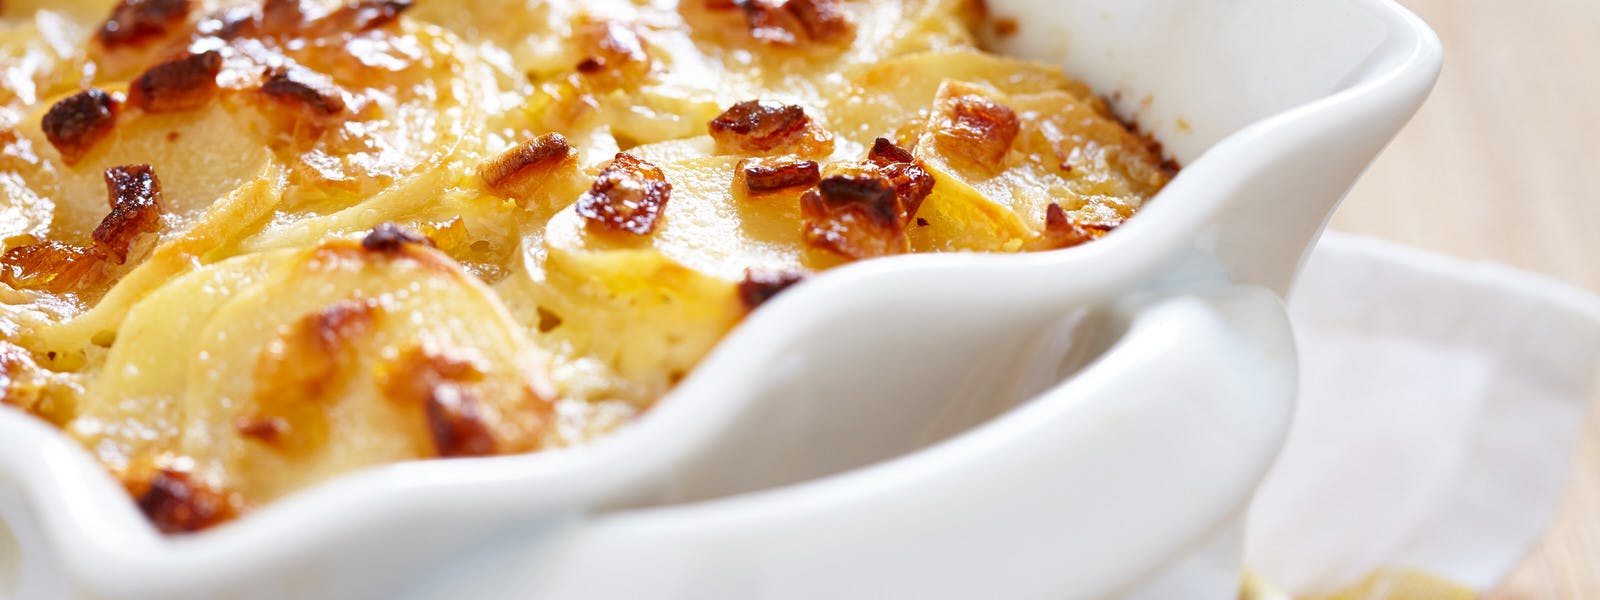 Scalloped Potatoes with Bacon & Chipotle Cream